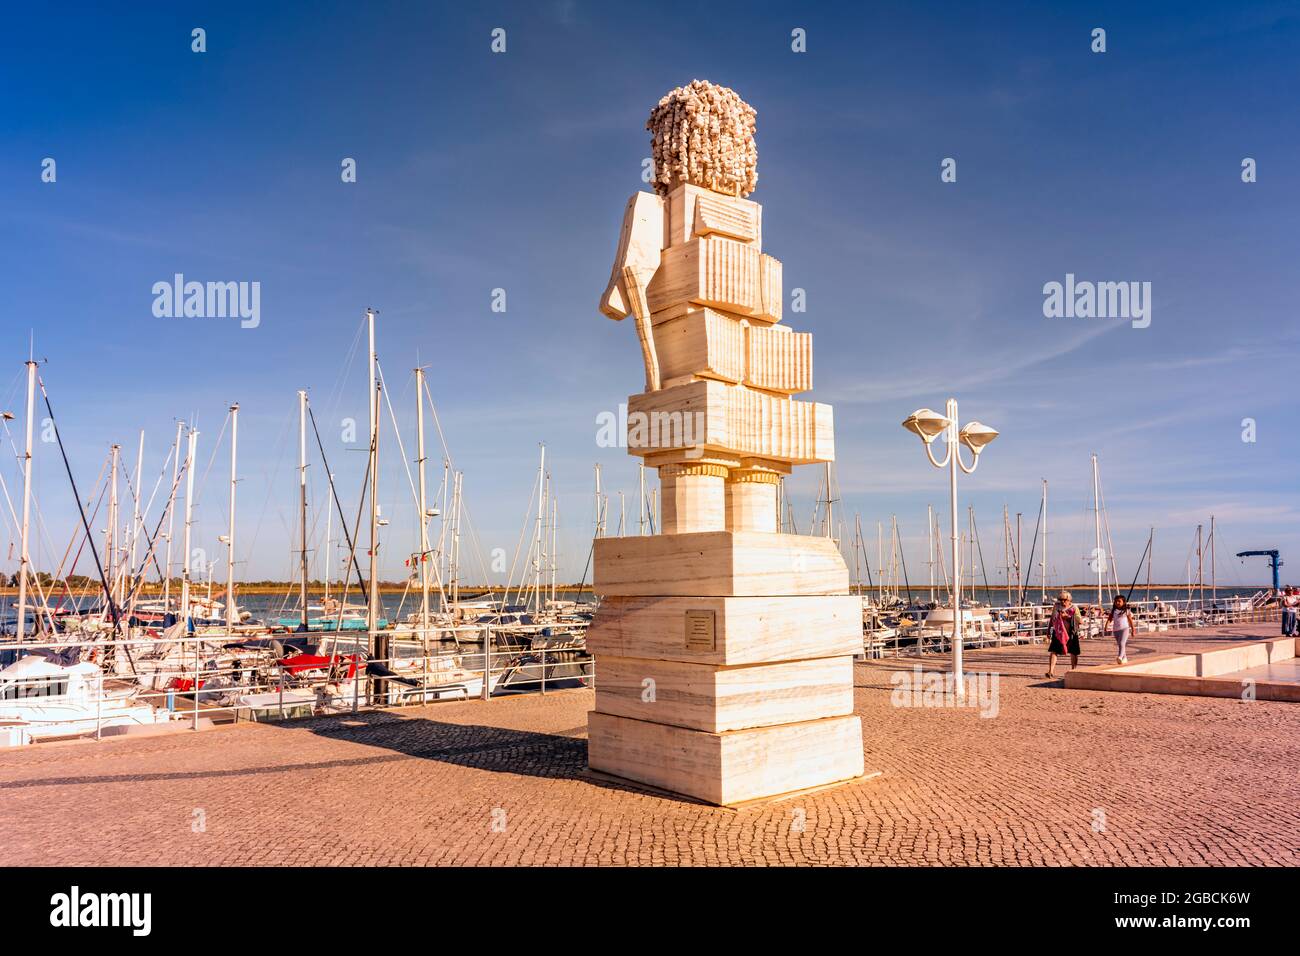 Statue / monument sculpture of Sebastiao Jose de Carvalho e Melo, 1st Marquis of Pombal surrounded by traditional Portuguese cobbles or calcada situate Stock Photo